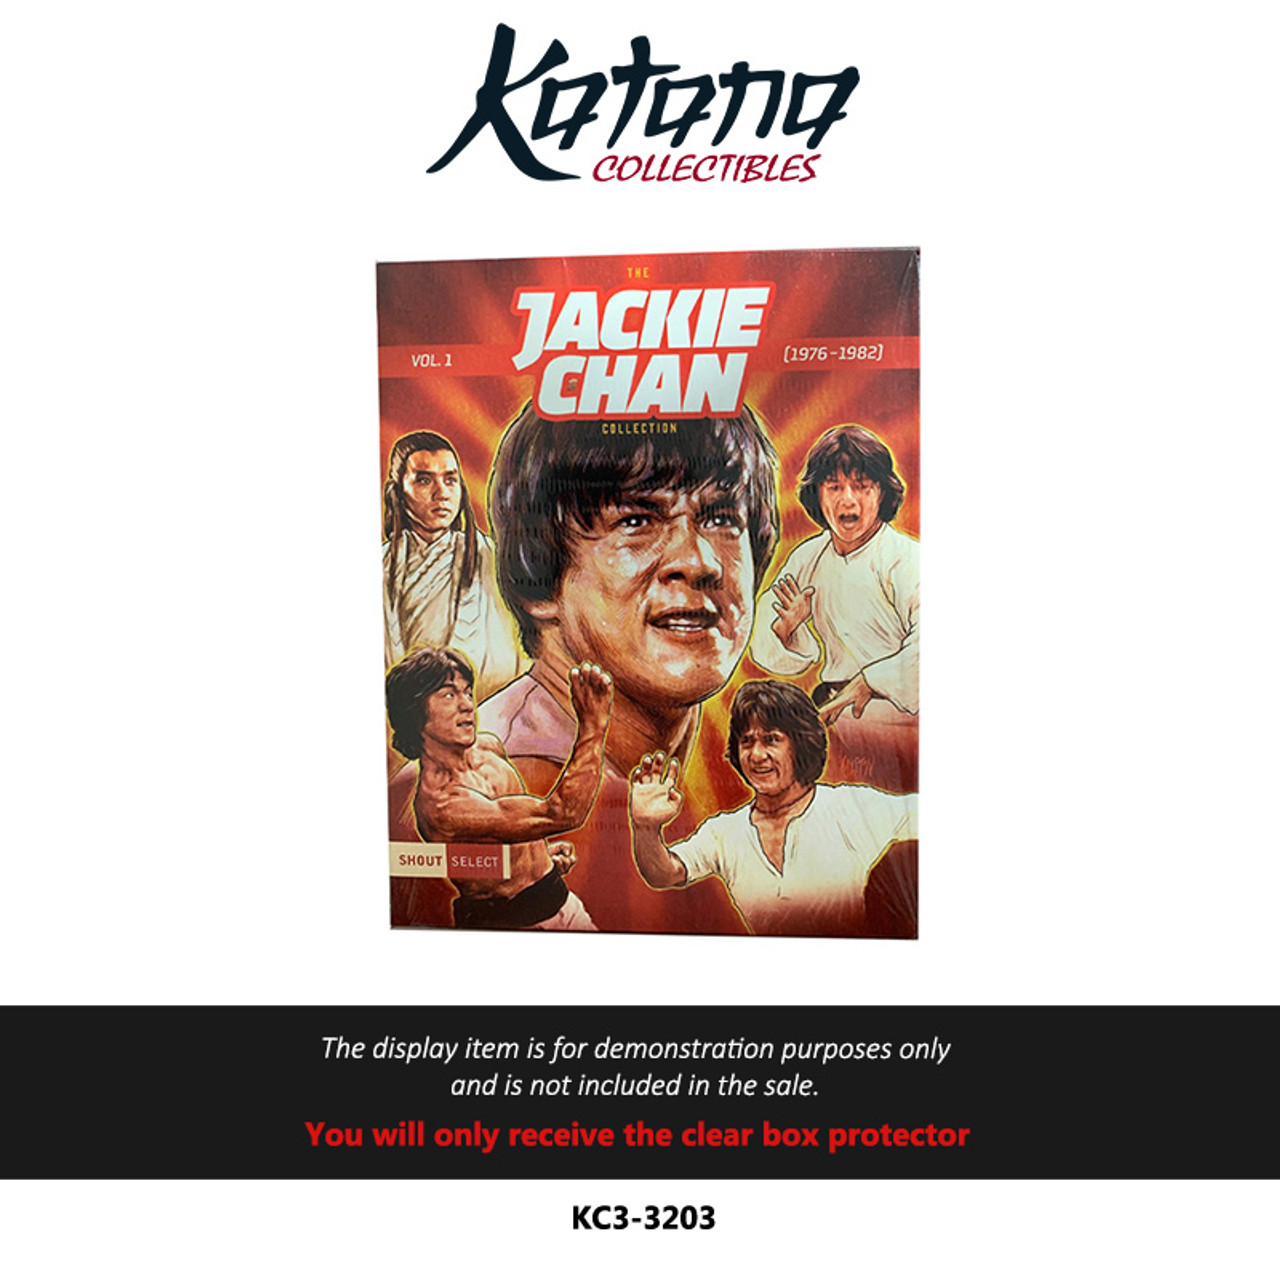 Katana Collectibles Protector For Shout Factory - Jackie Chan Collection Vol 1